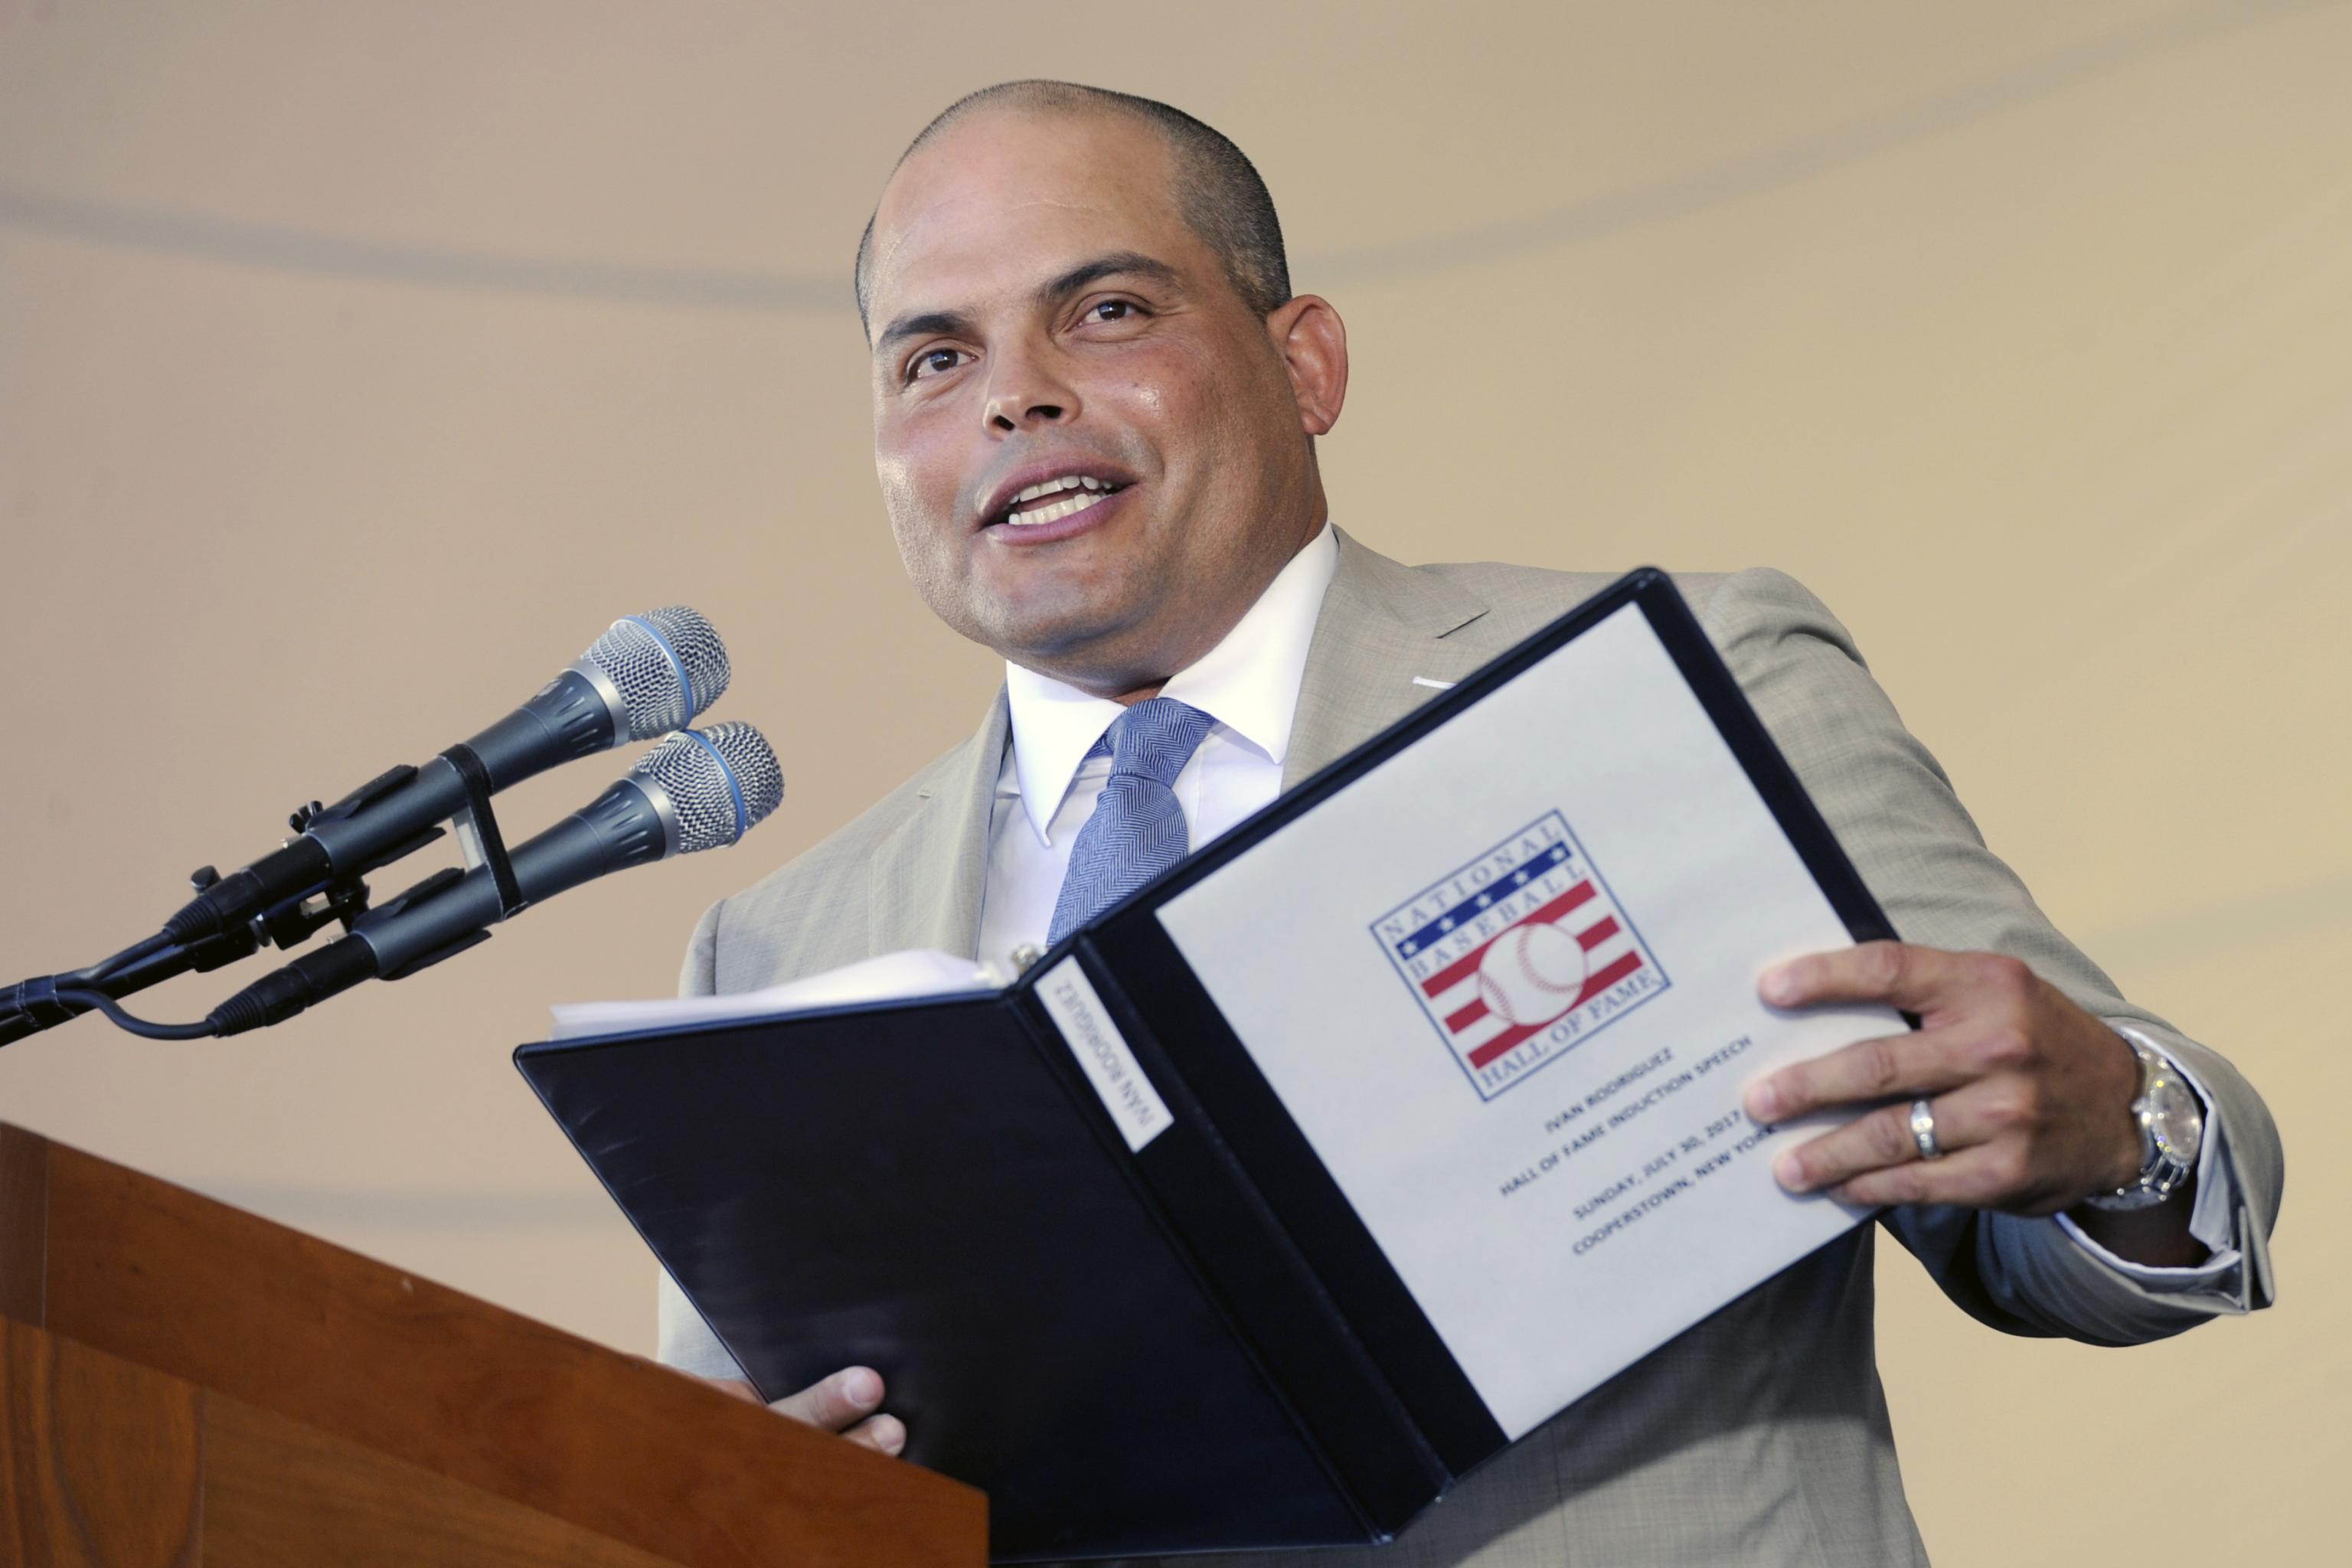 Giants call on son of Hall of Famer Ivan 'Pudge' Rodriguez to join